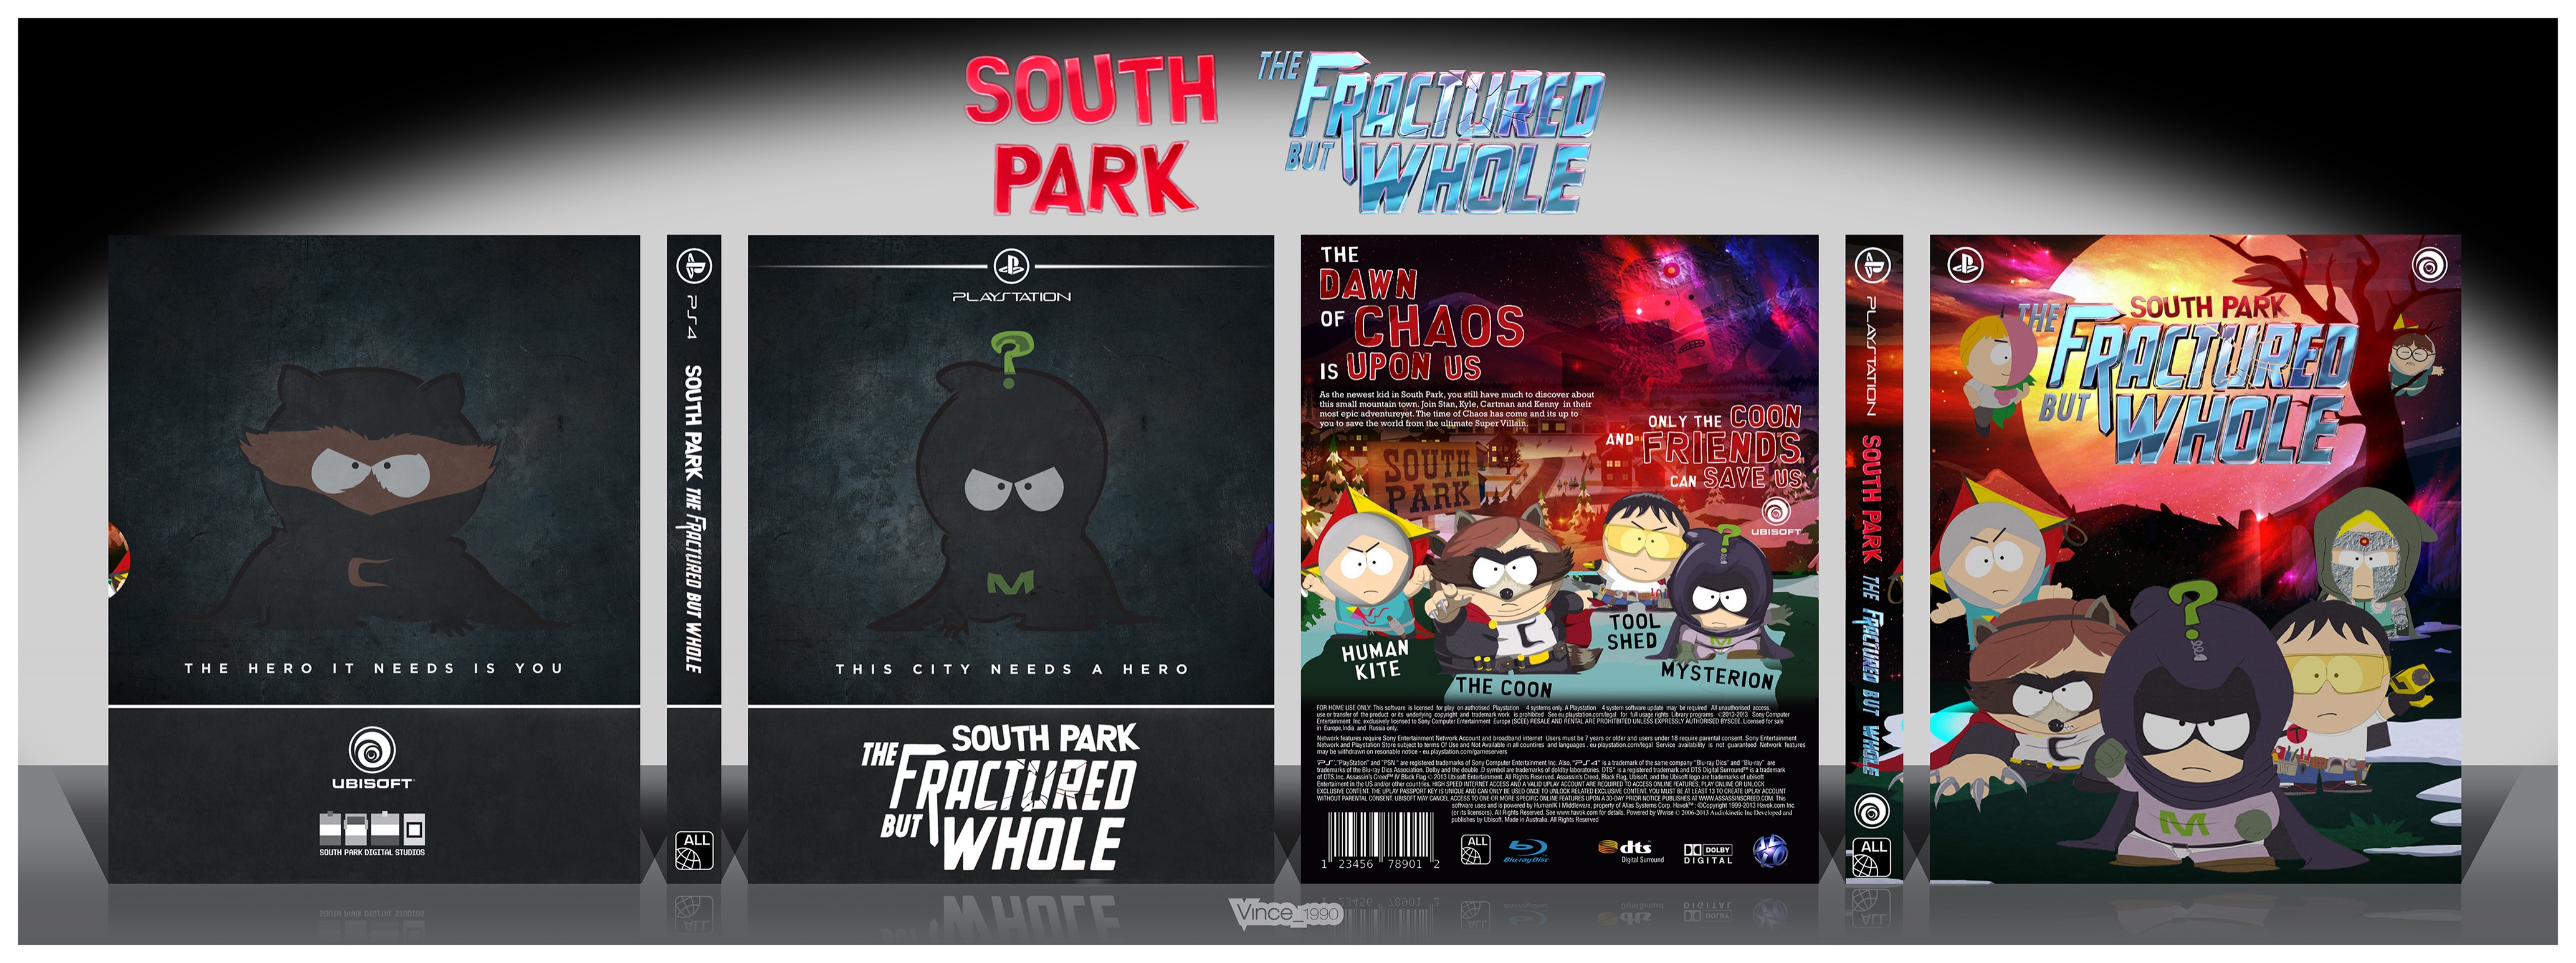 south park fractured but whole gender differences